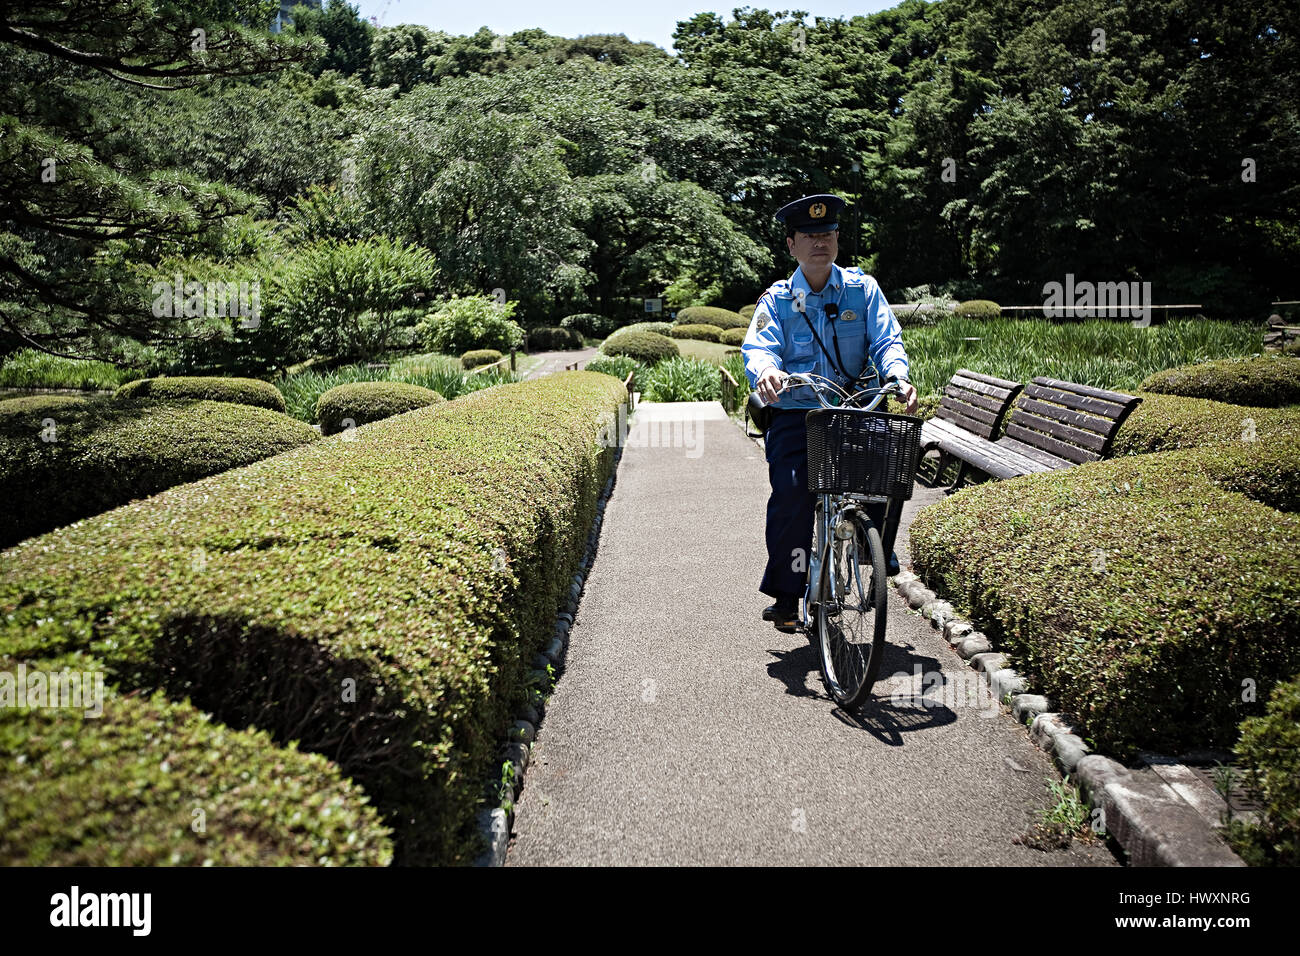 A Japanese police officer riding the bike in a park near the Tokyo Imperial Palace in Tokyo, Japan. Stock Photo